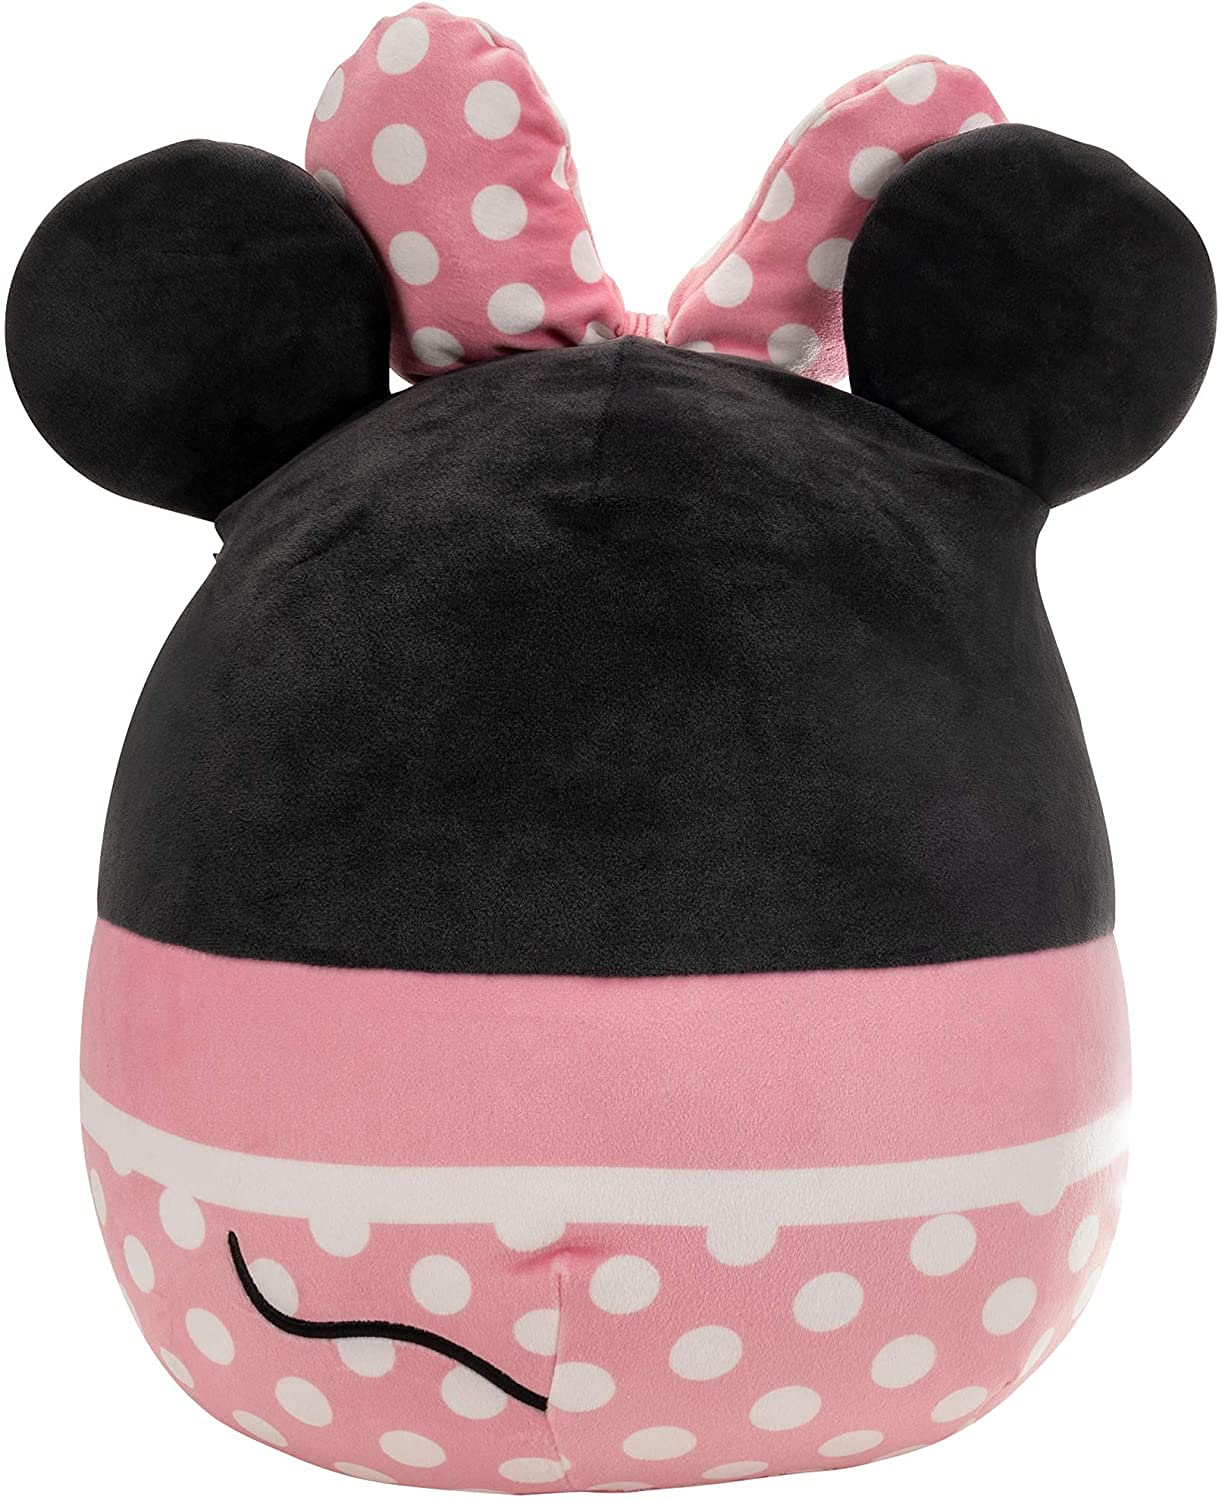 SQUISHMALLOW KellyToy - Disney Minnie Mouse - 8 Inch (20cm) - Official Licensed Product - Exclusive Disney 2021 Squad